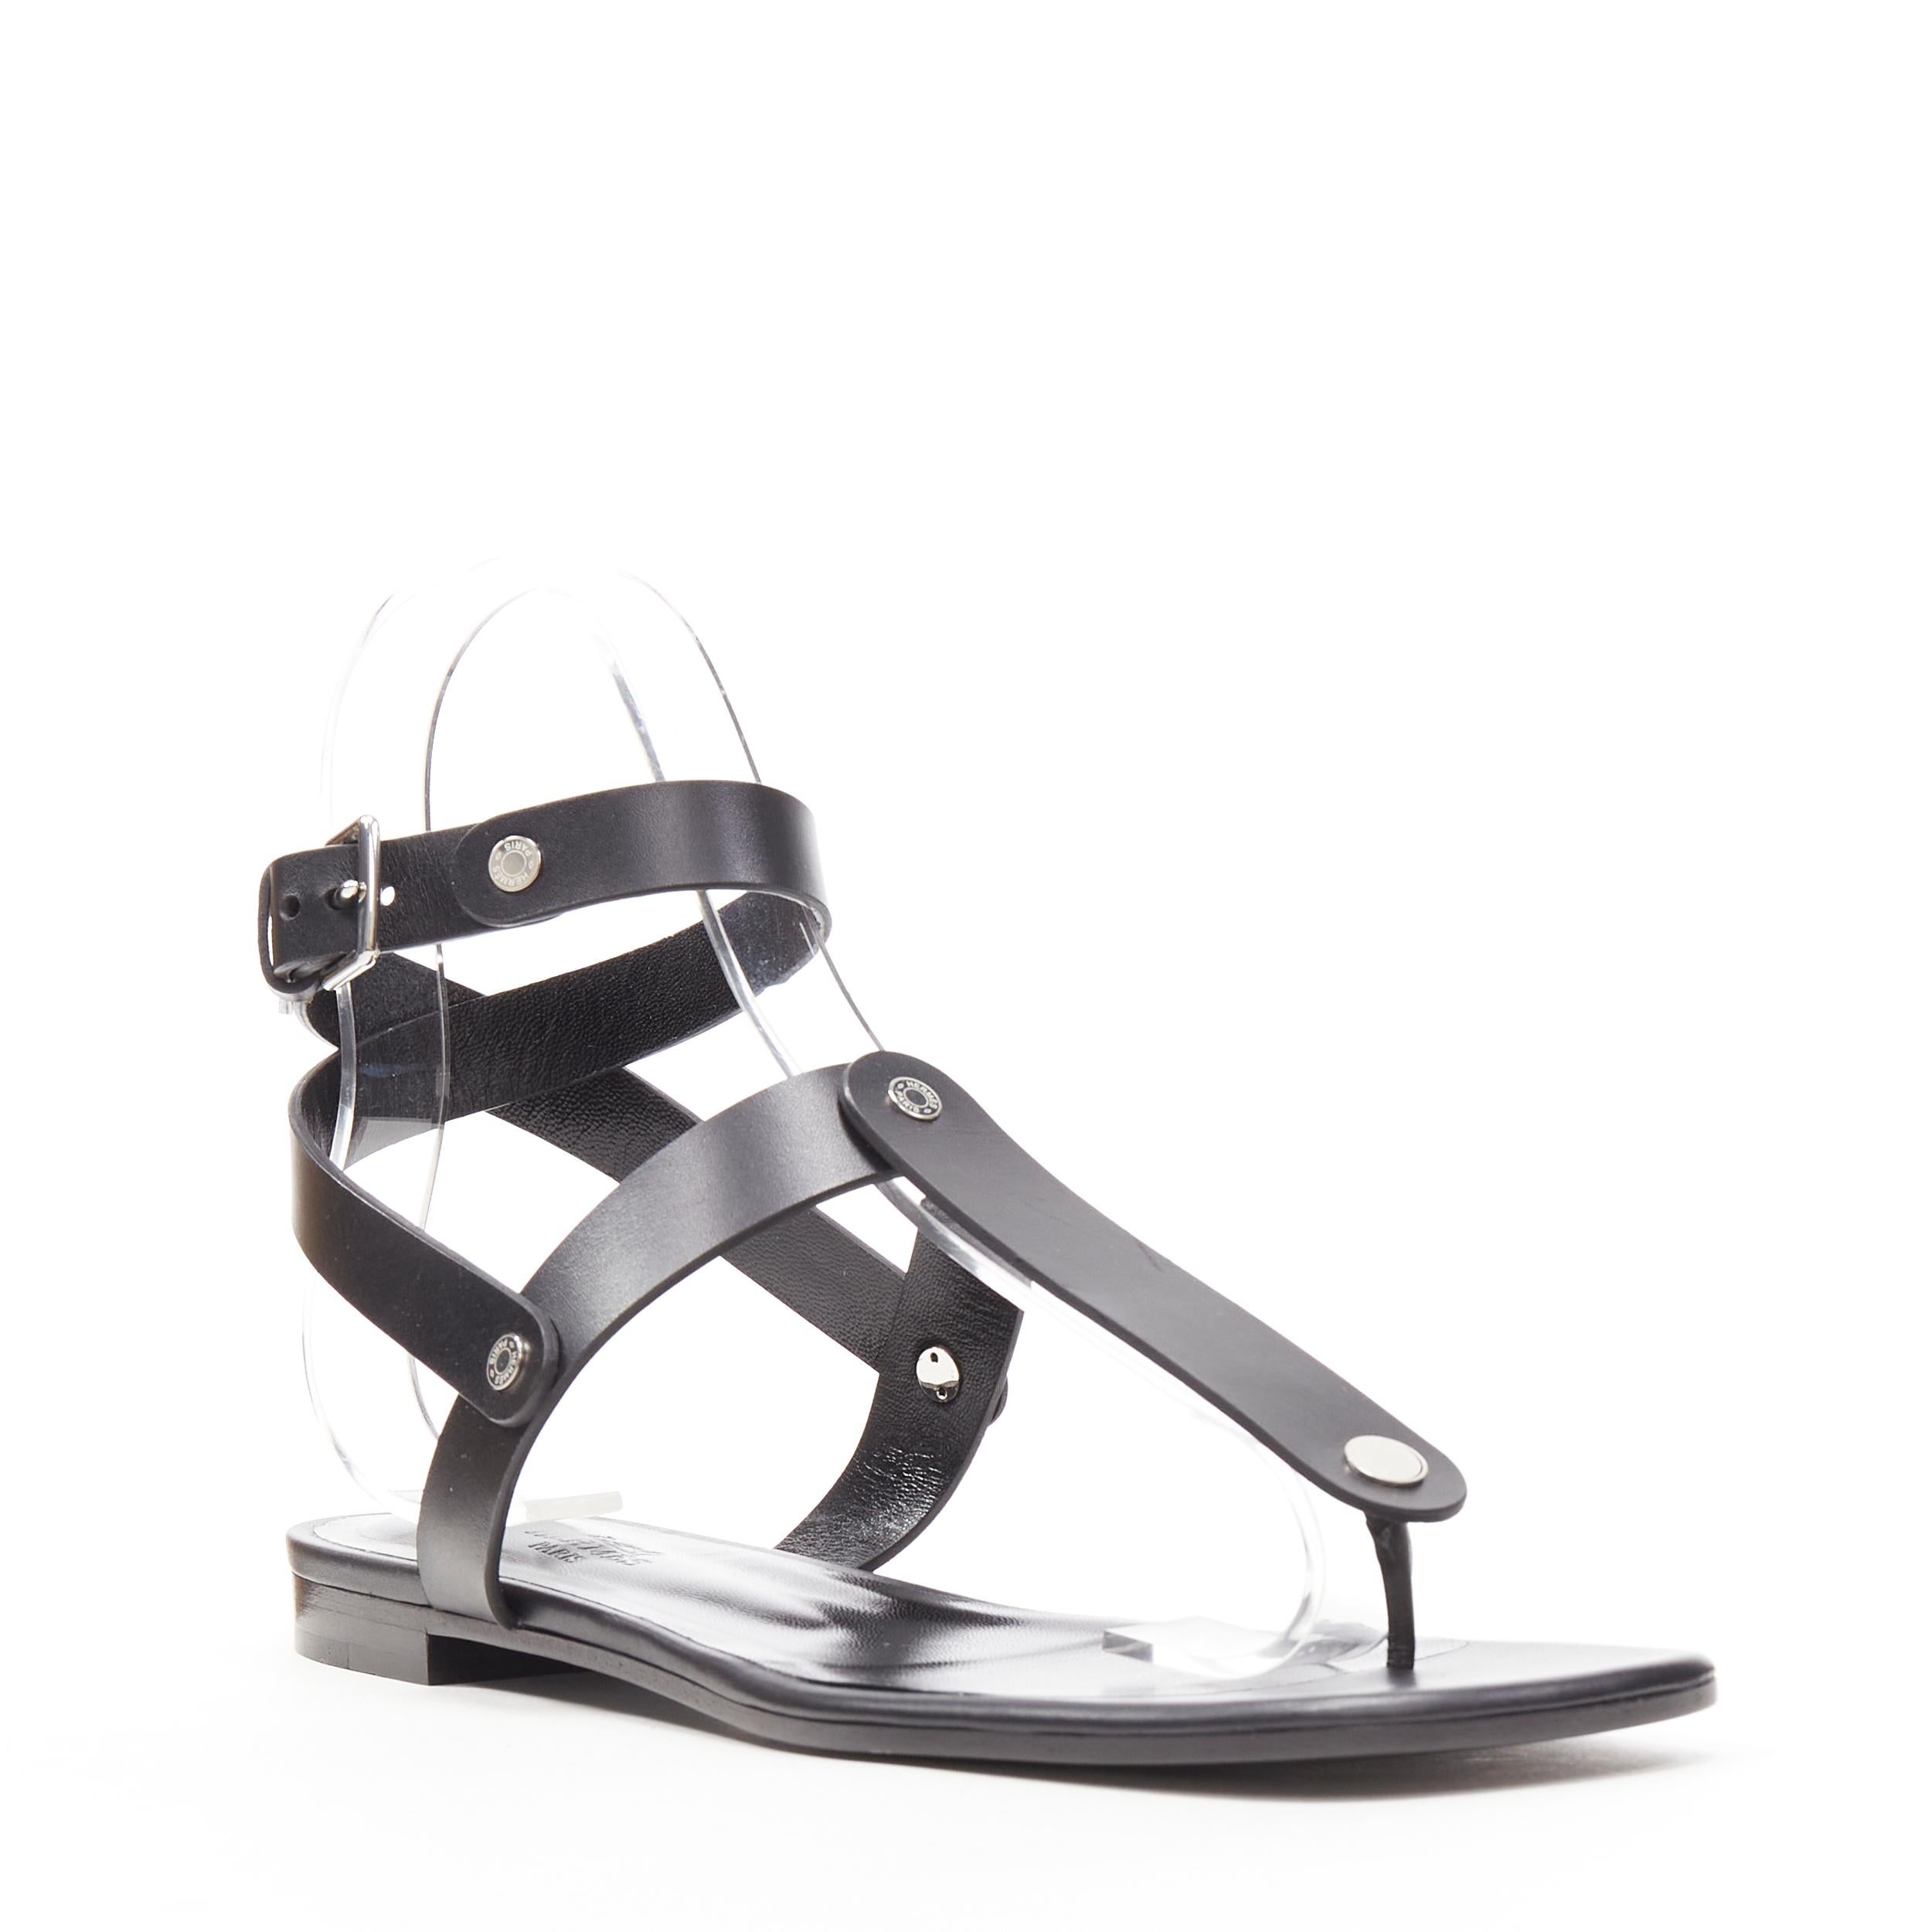 new HERMES black leather silver logo stud ankle strap thong sandals EU37.5 Reference: AEMA/A00016 
Brand: Hermes 
Model: T-strap gladiator 
Material: Leather 
Color: Black 
Pattern: Solid 
Closure: Buckle 
Extra Detail: Black leather. Silver-tone